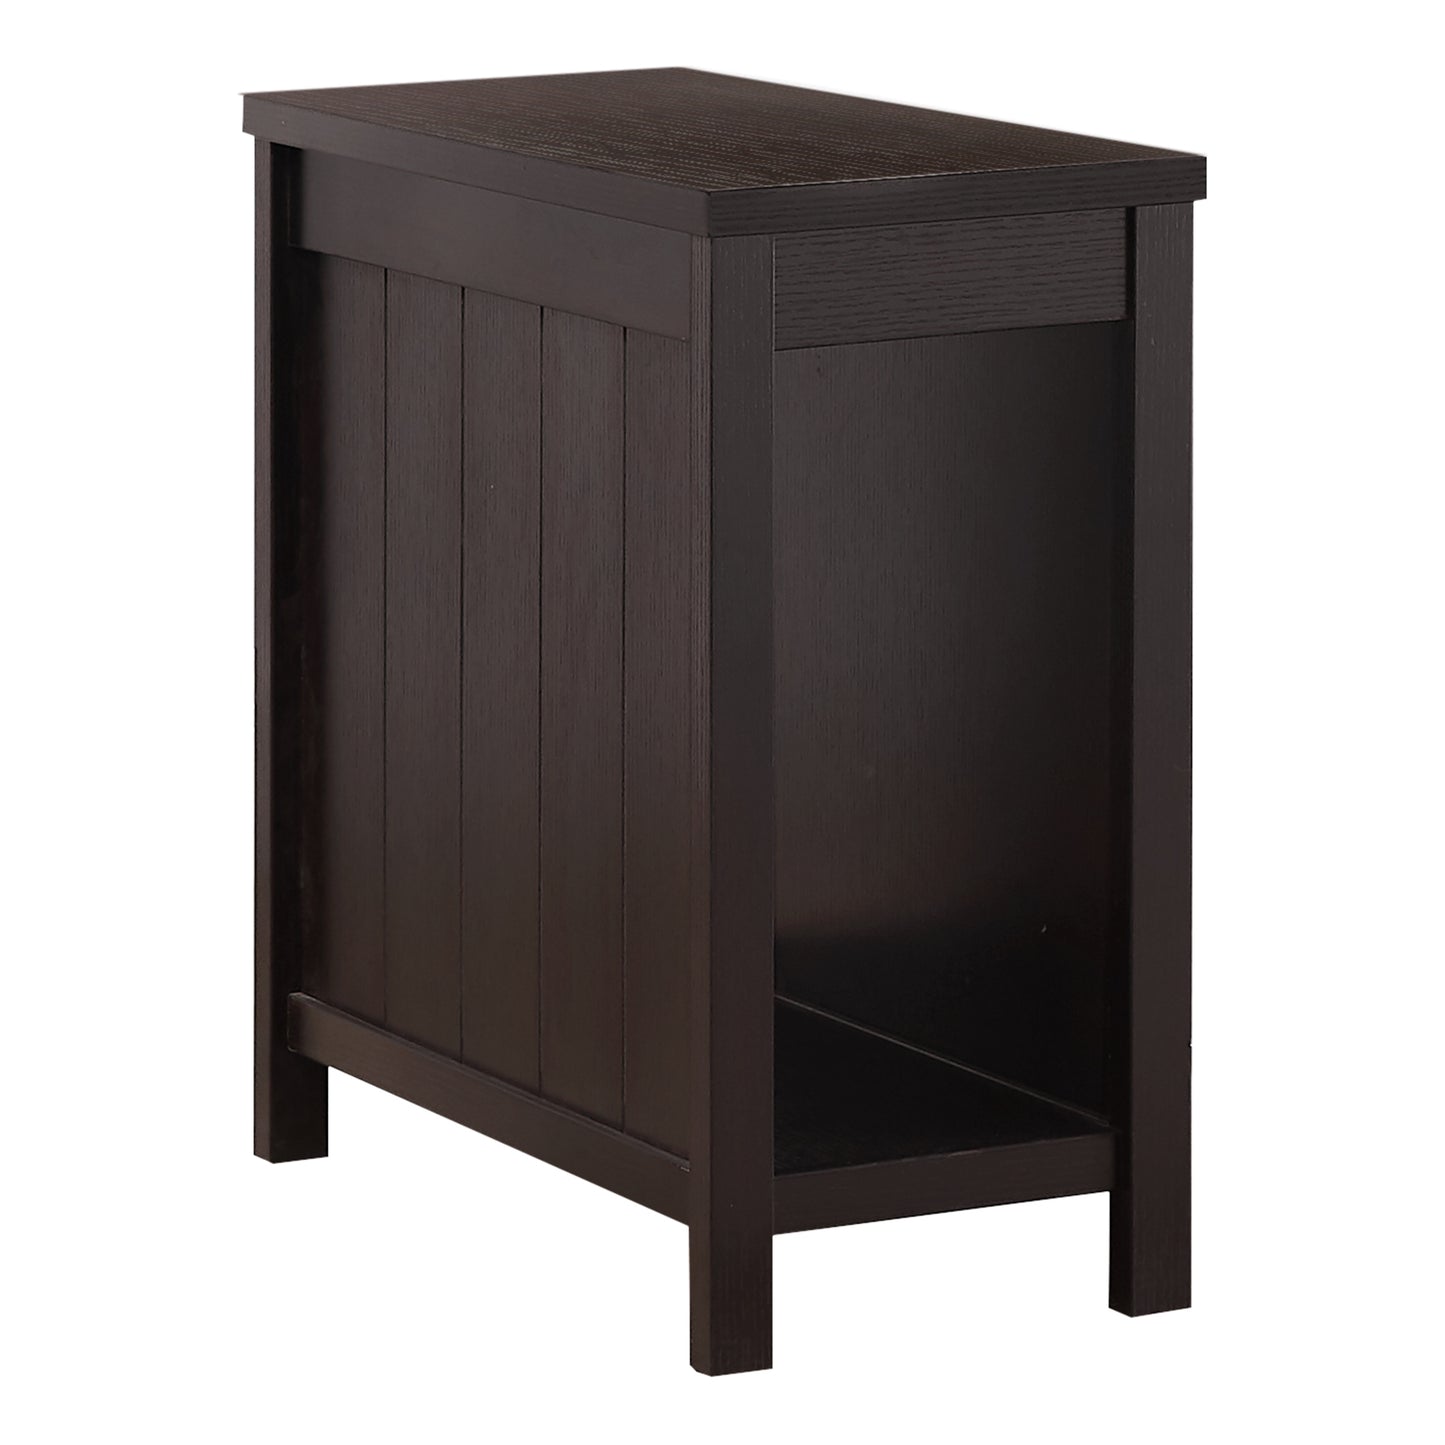 Rectangular Espresso Smooth Laminated Wood Accent Table